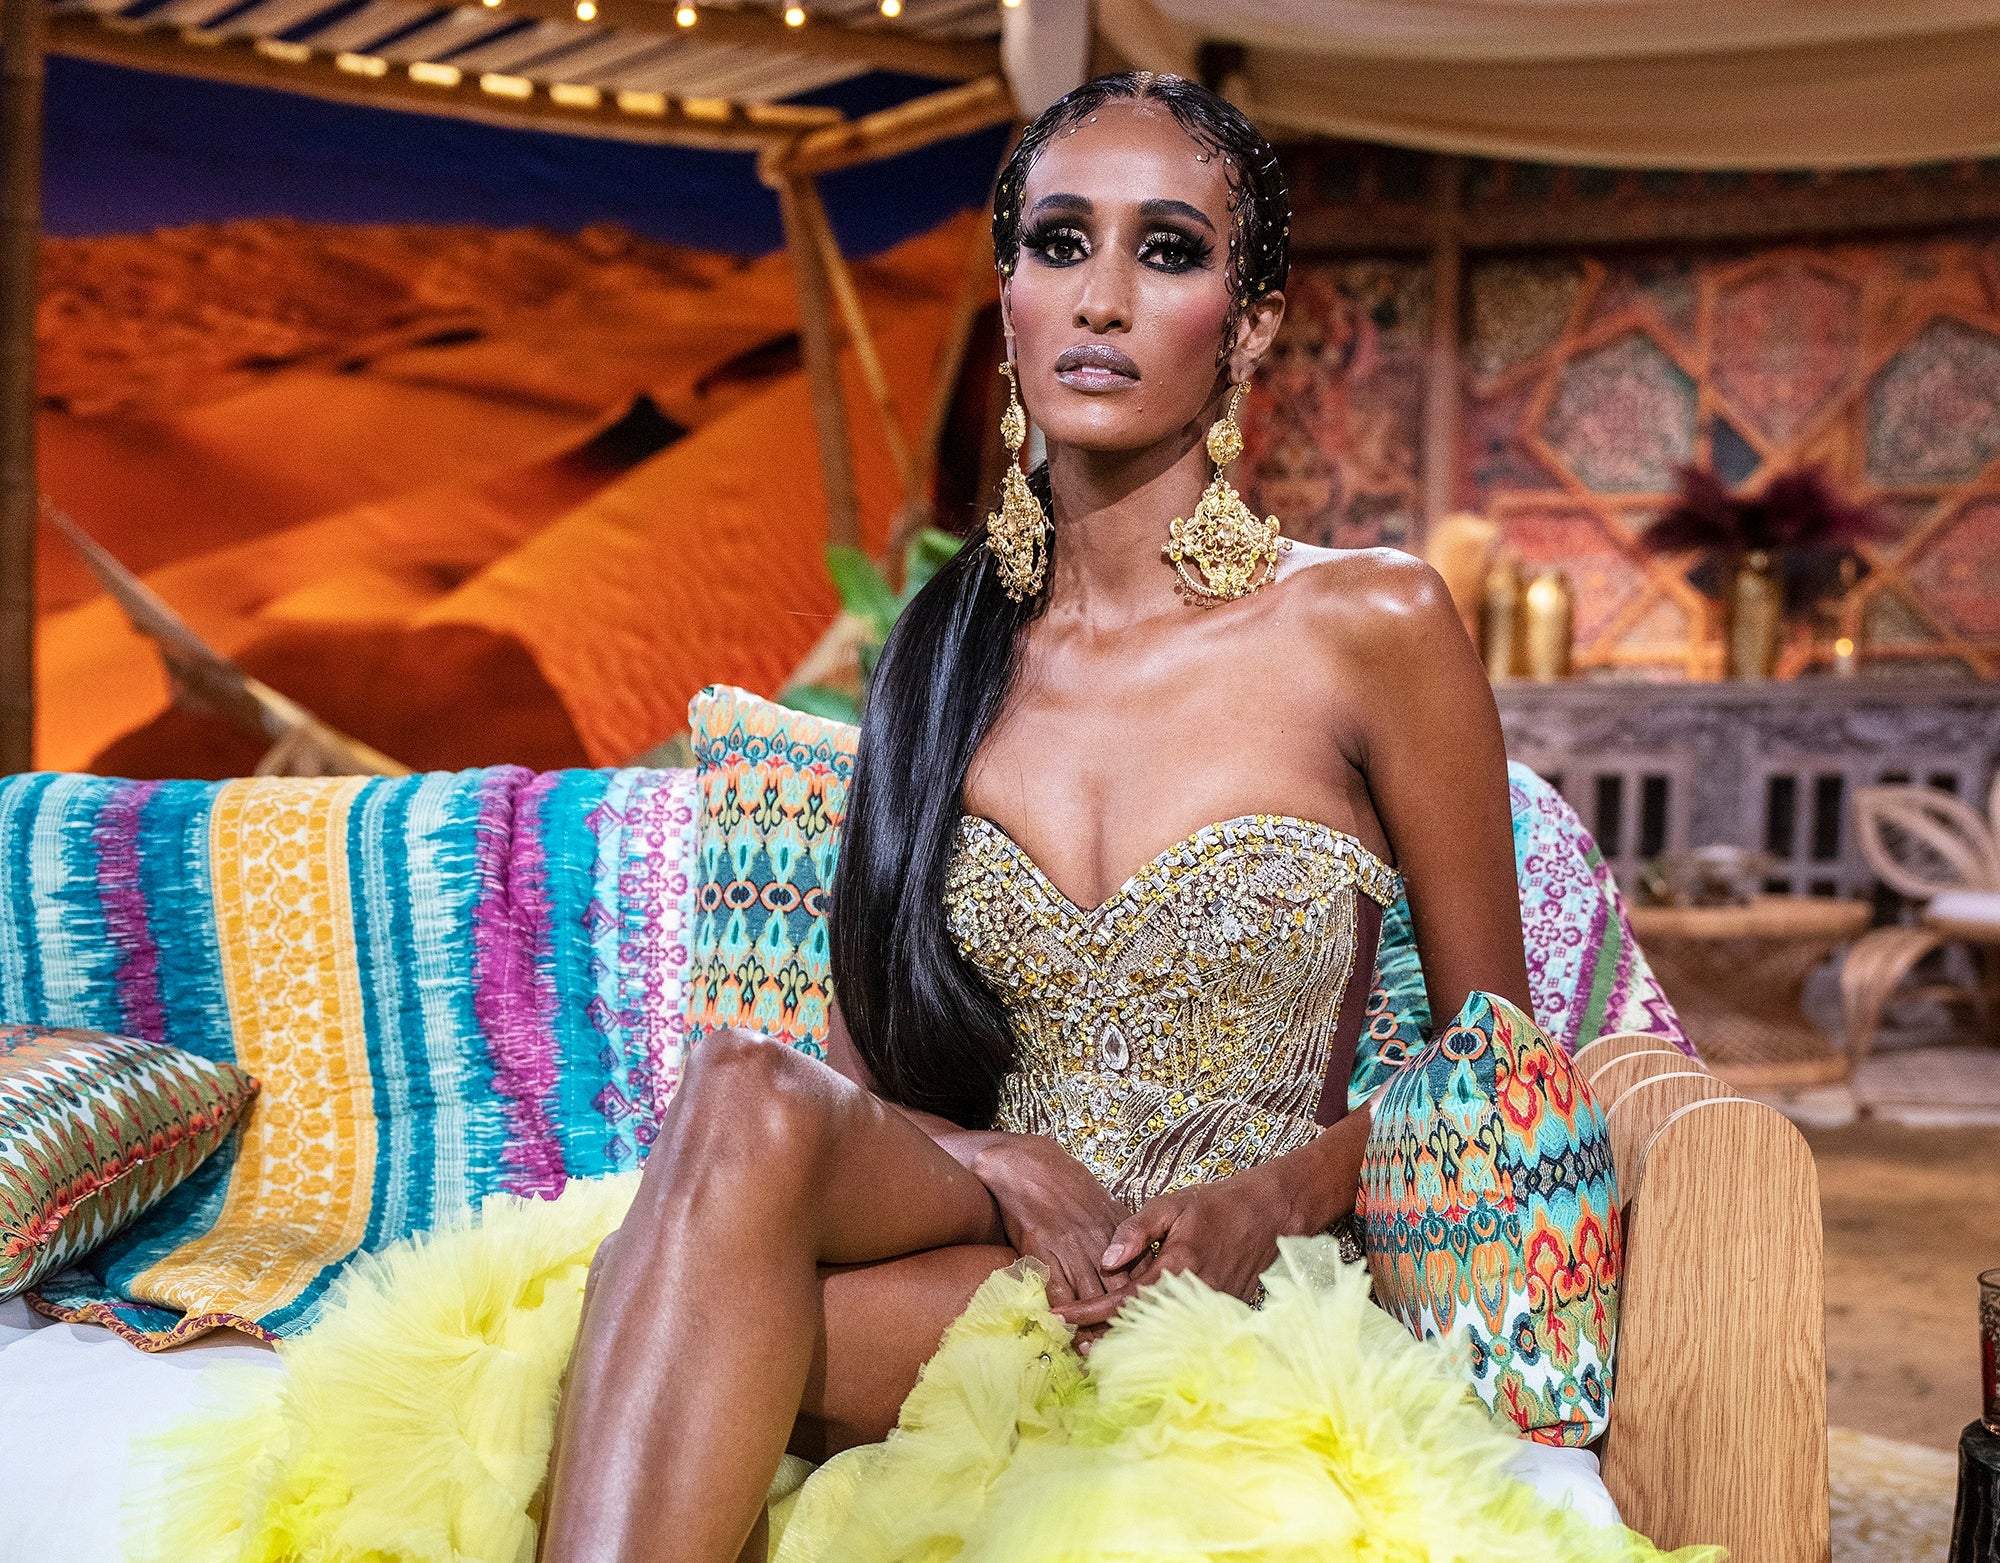 Chanel Ayan Of 'RHODubai' On How Being Circumcised As A Child Impacted Her  Ability To Be Intimate As An Adult | Flipboard